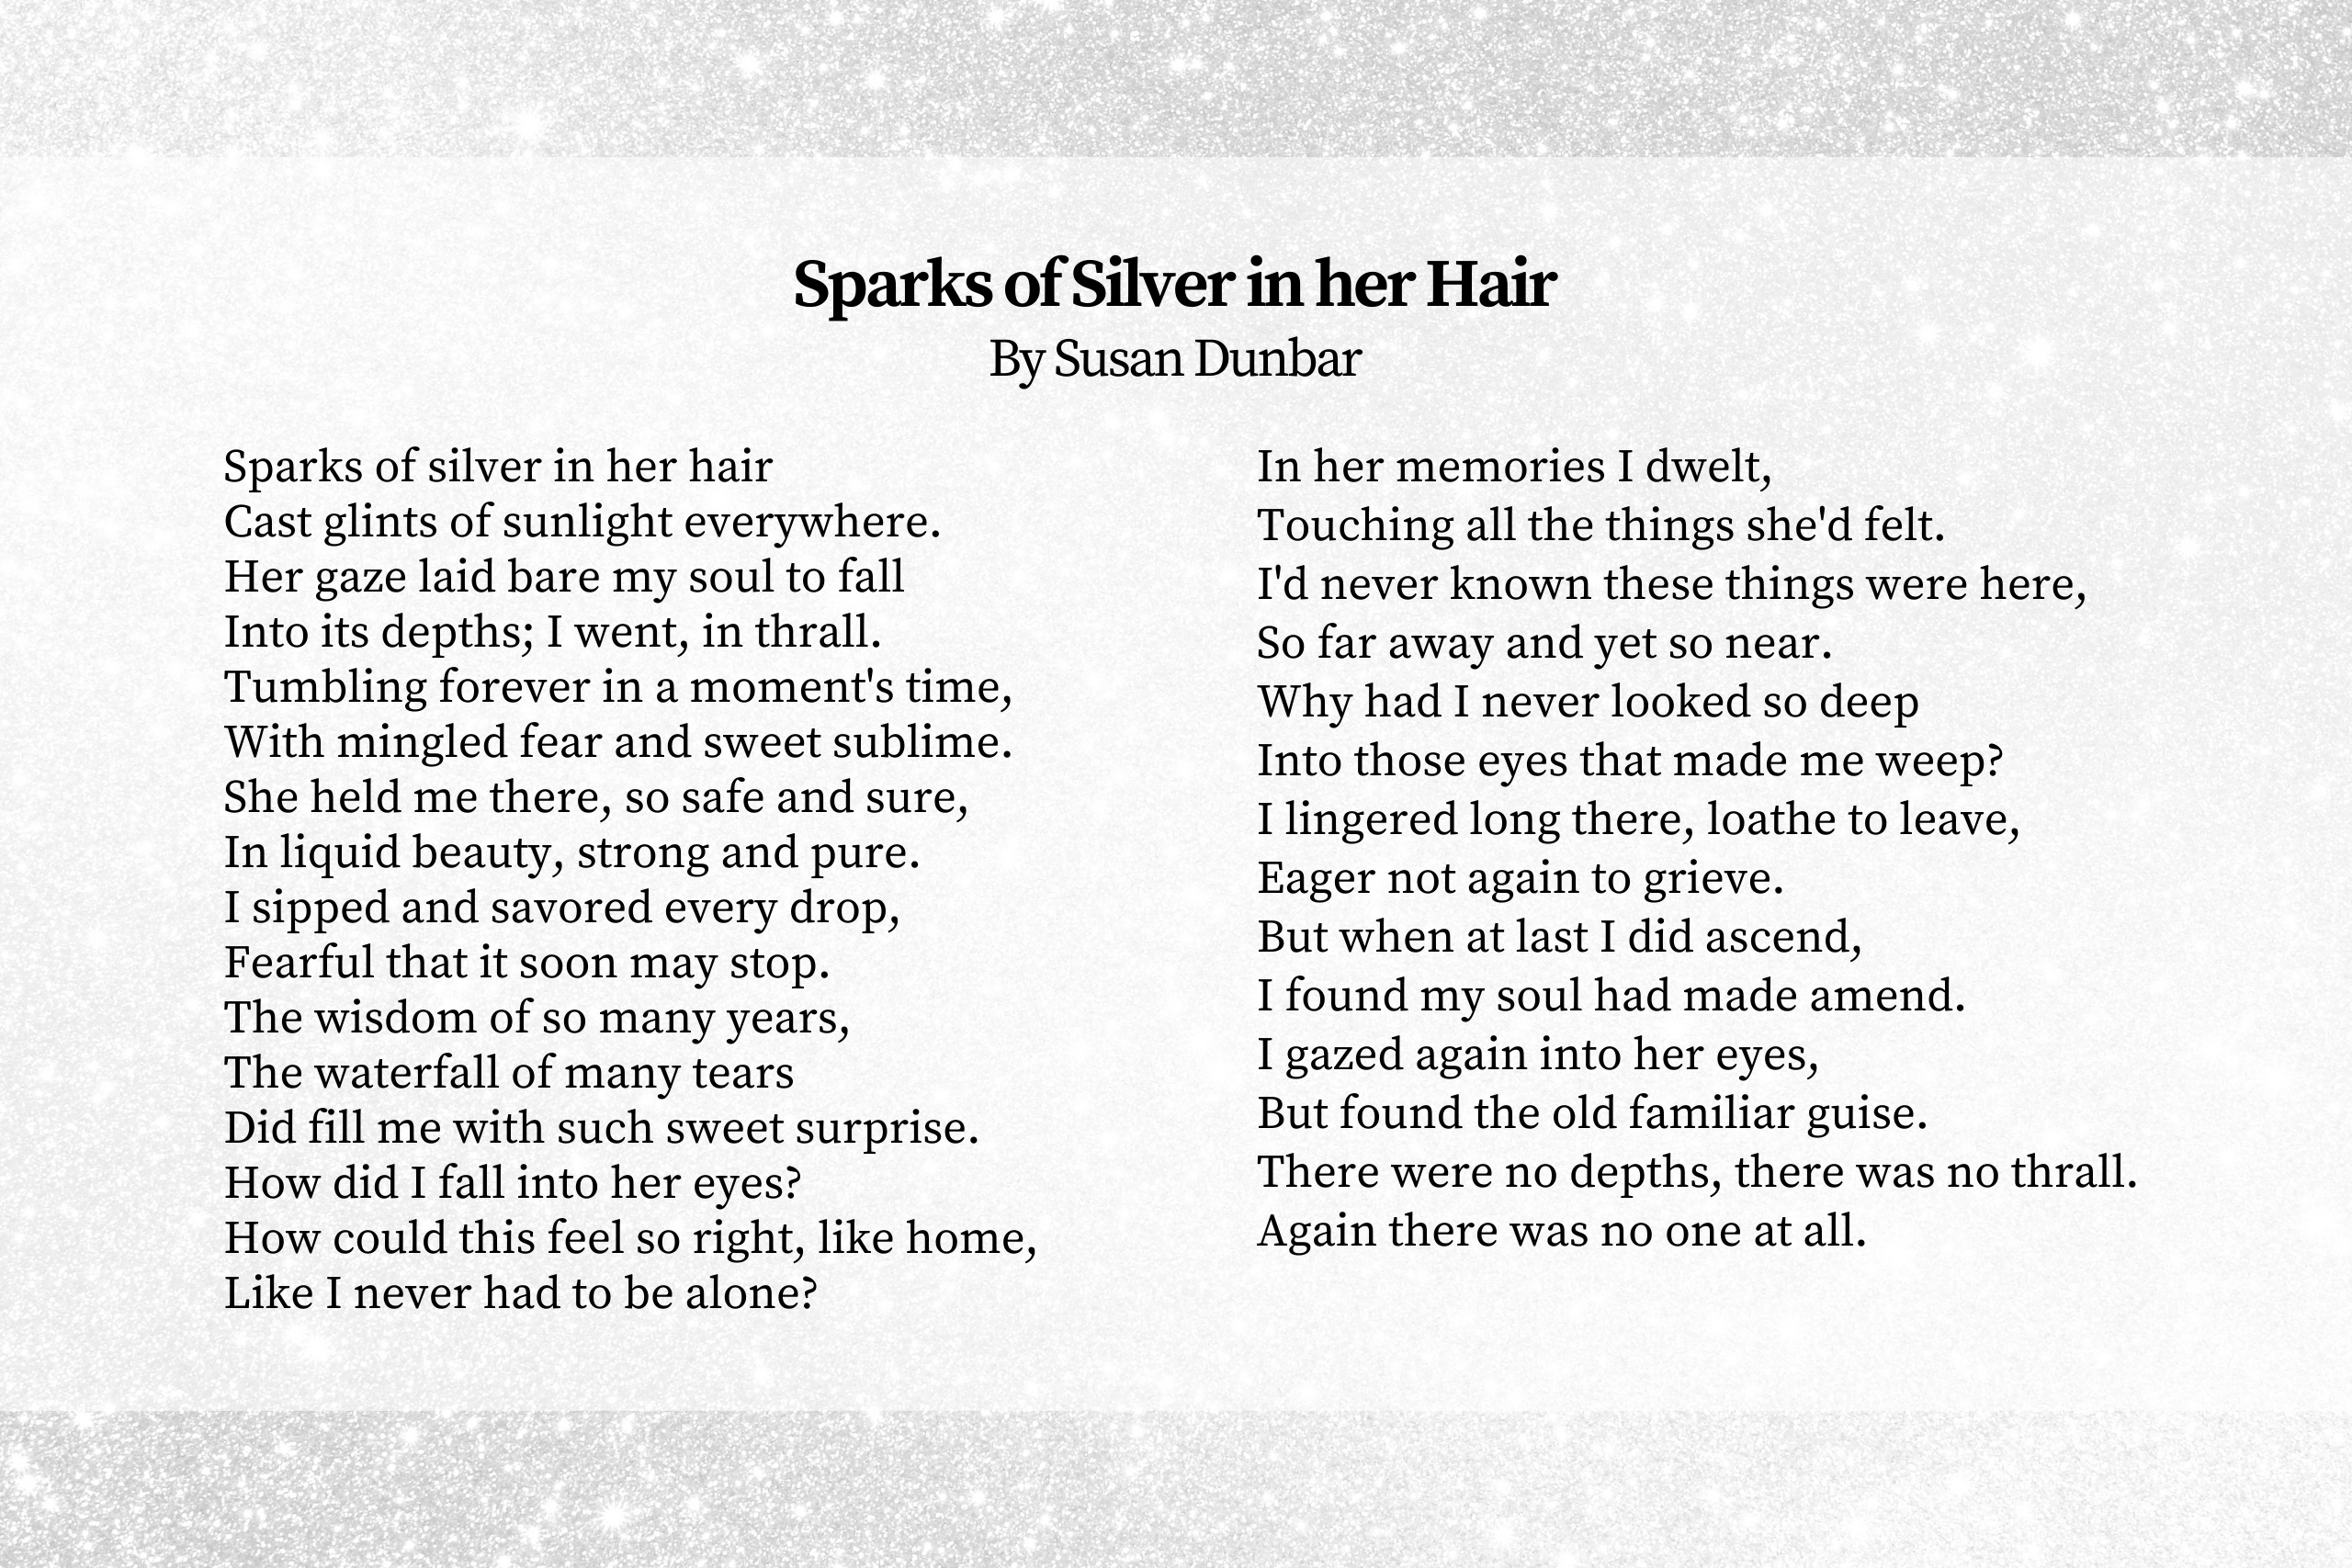 Sparks of Silver in her Hair